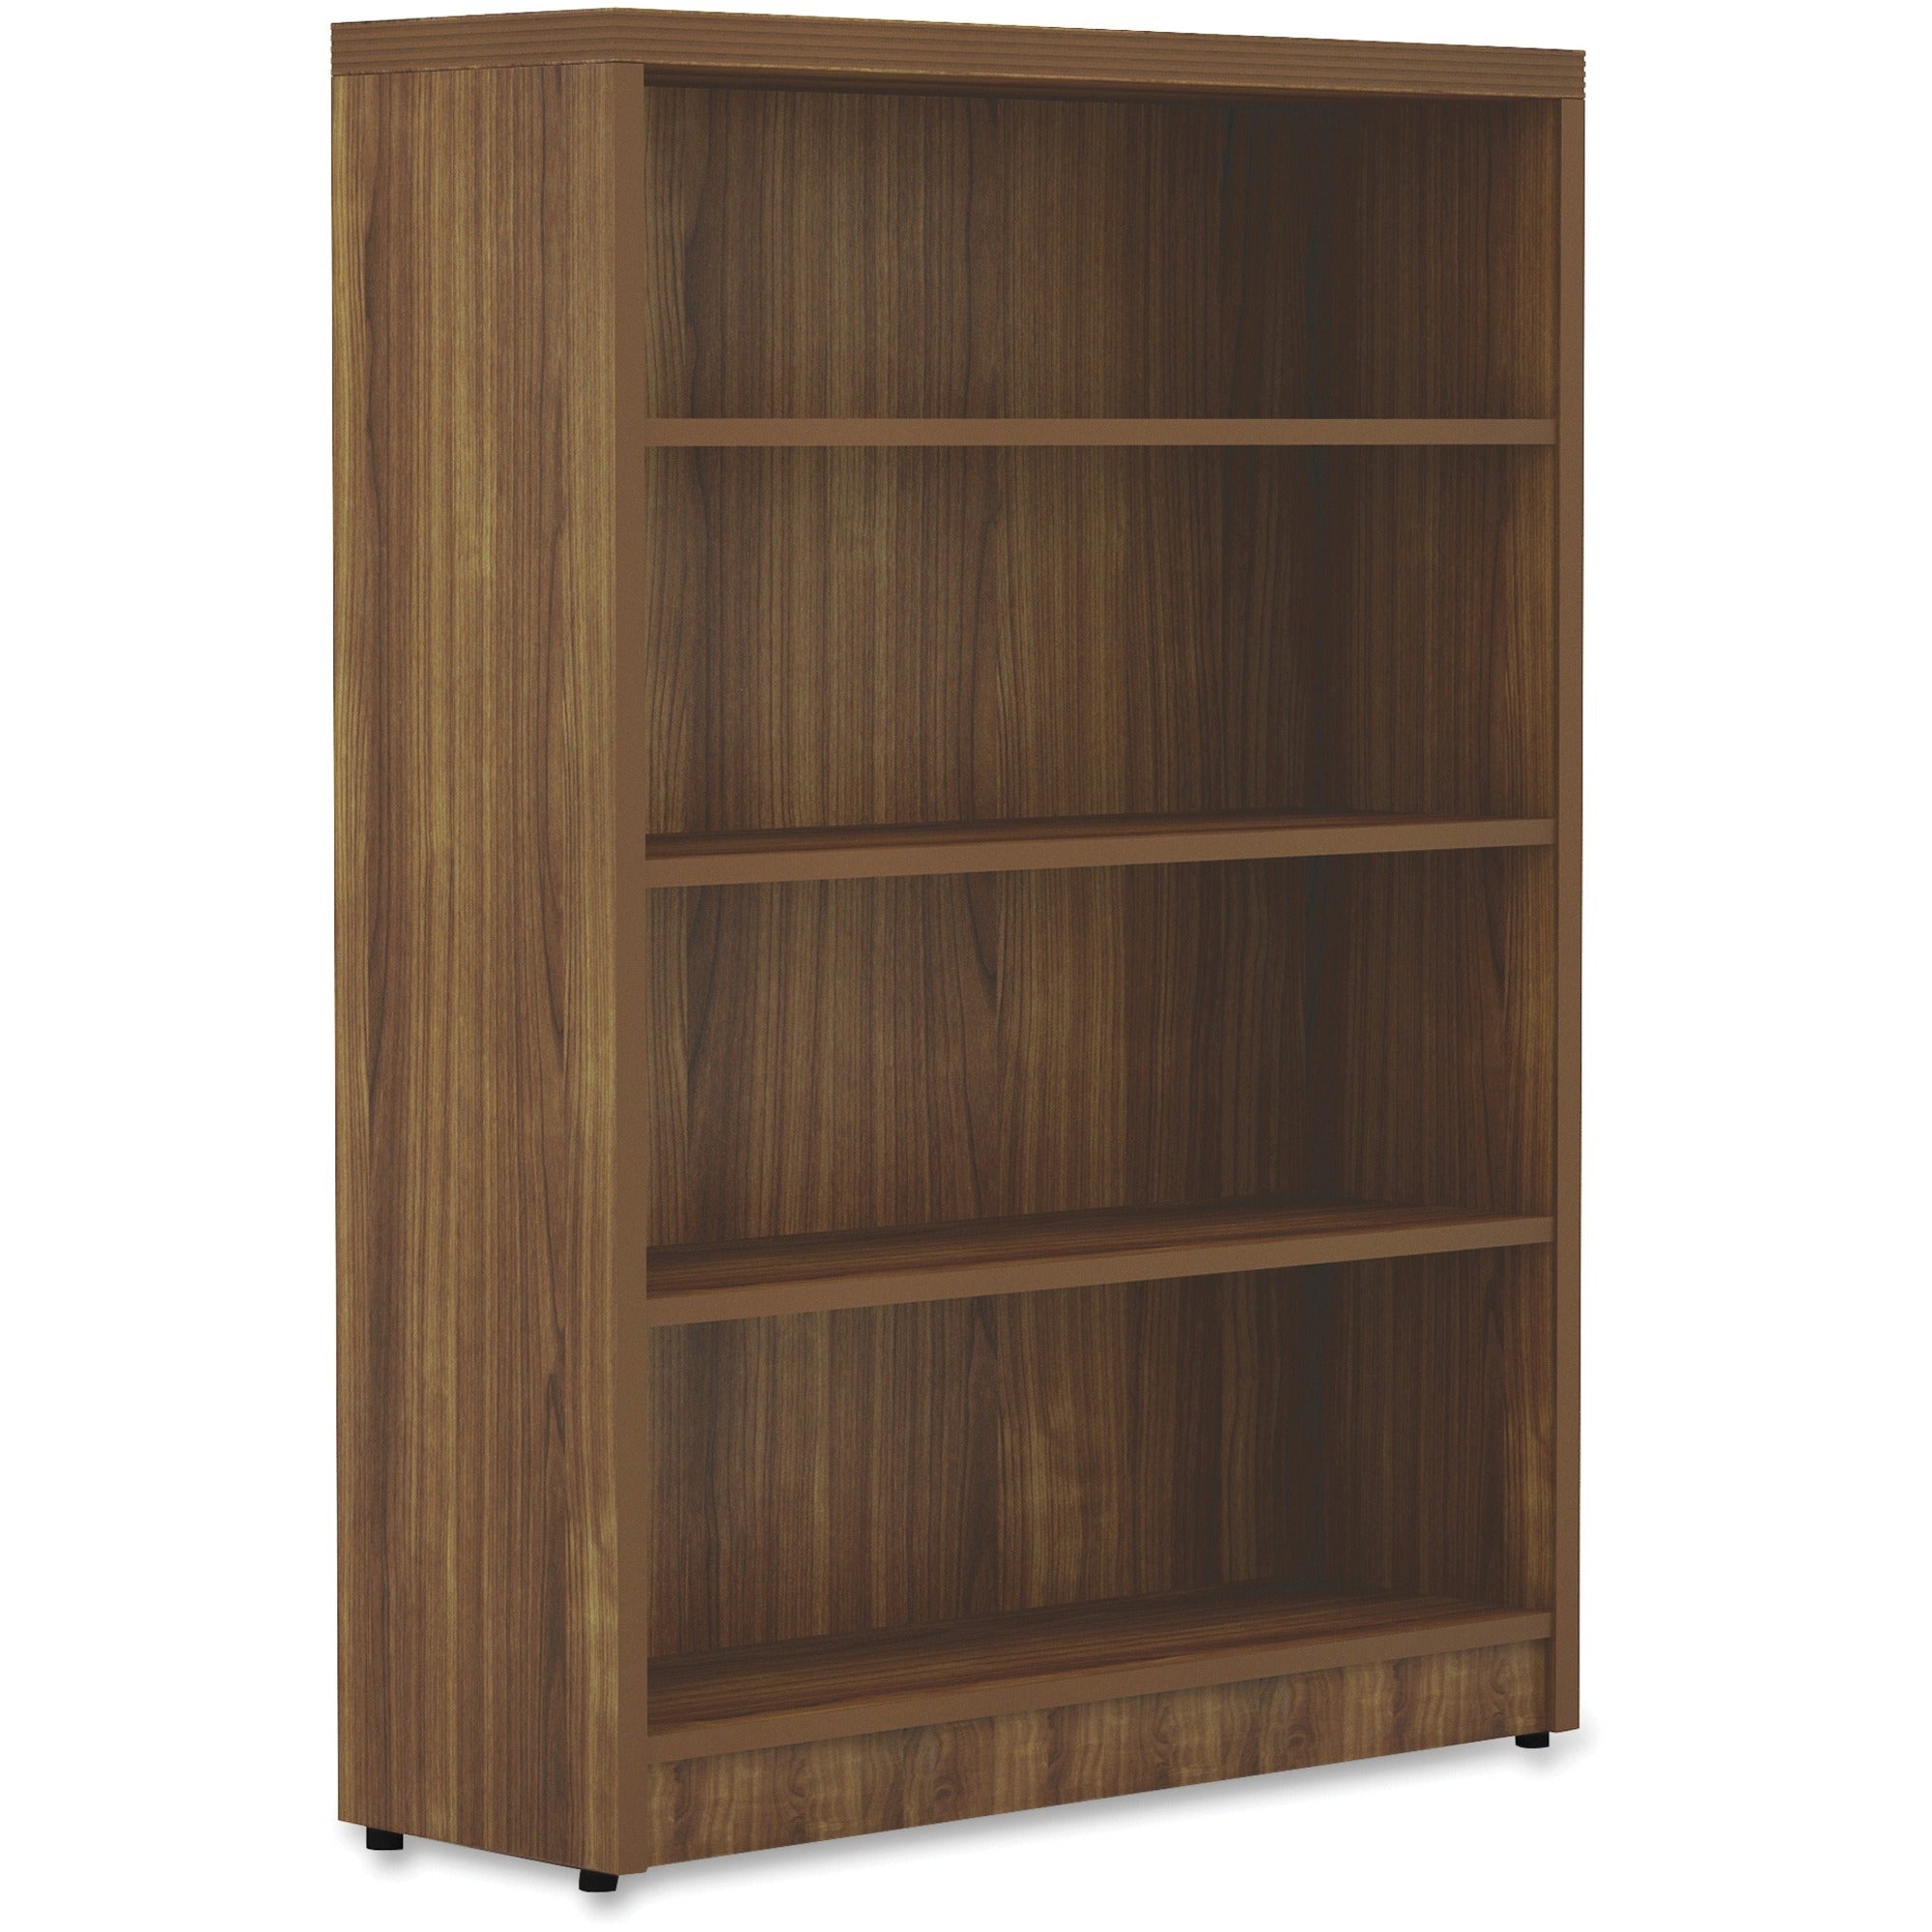 Lorell Chateau Series Bookshelf - 1.5" Top, 36" x 11.6"48.5" Bookshelf - 4 Shelve(s) - Reeded Edge - Material: P2 Particleboard - Finish: Walnut, Laminate - Durable, Sturdy - For Office, Book - 